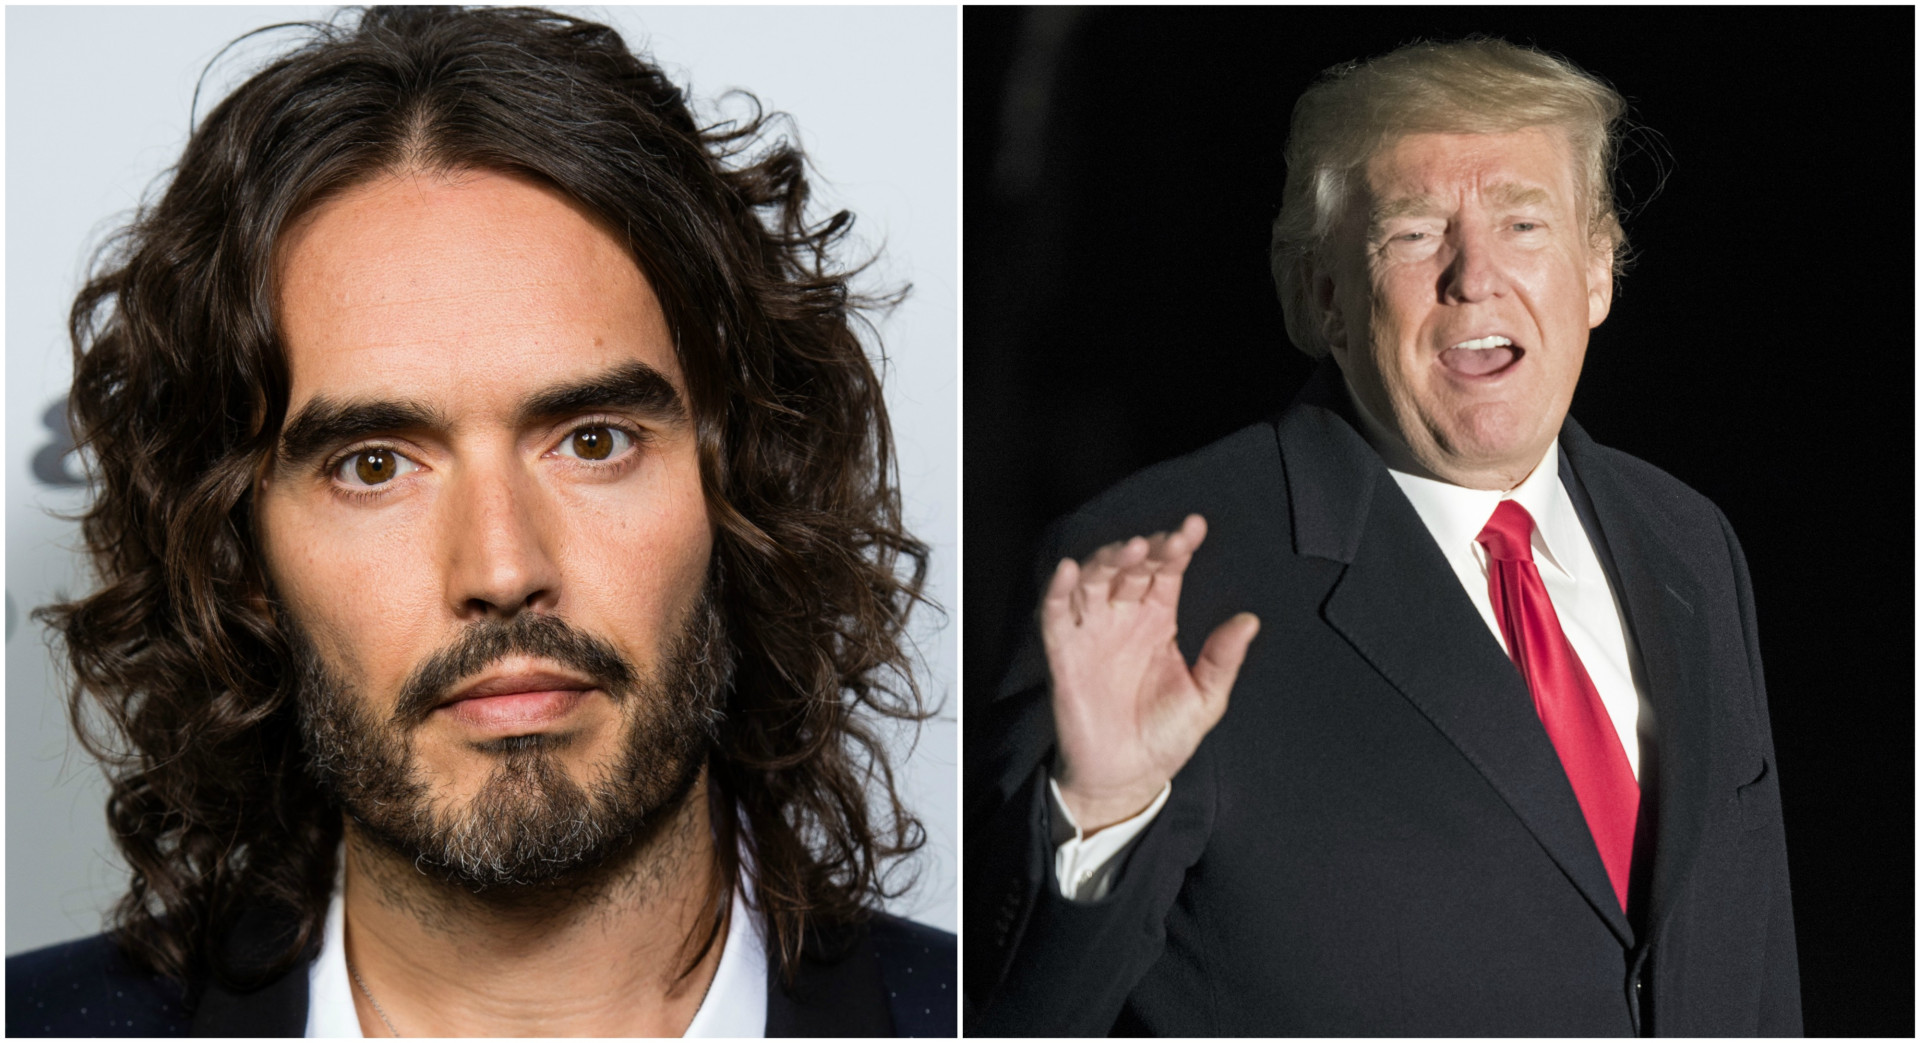 <p>Trump's comments about the actor's abilities on social media led to Brand questioning if Trump is intoxicated while posting tweets.</p><p><a href="https://www.msn.com/en-us/community/channel/vid-7xx8mnucu55yw63we9va2gwr7uihbxwc68fxqp25x6tg4ftibpra?cvid=94631541bc0f4f89bfd59158d696ad7e">Follow us and access great exclusive content every day</a></p>